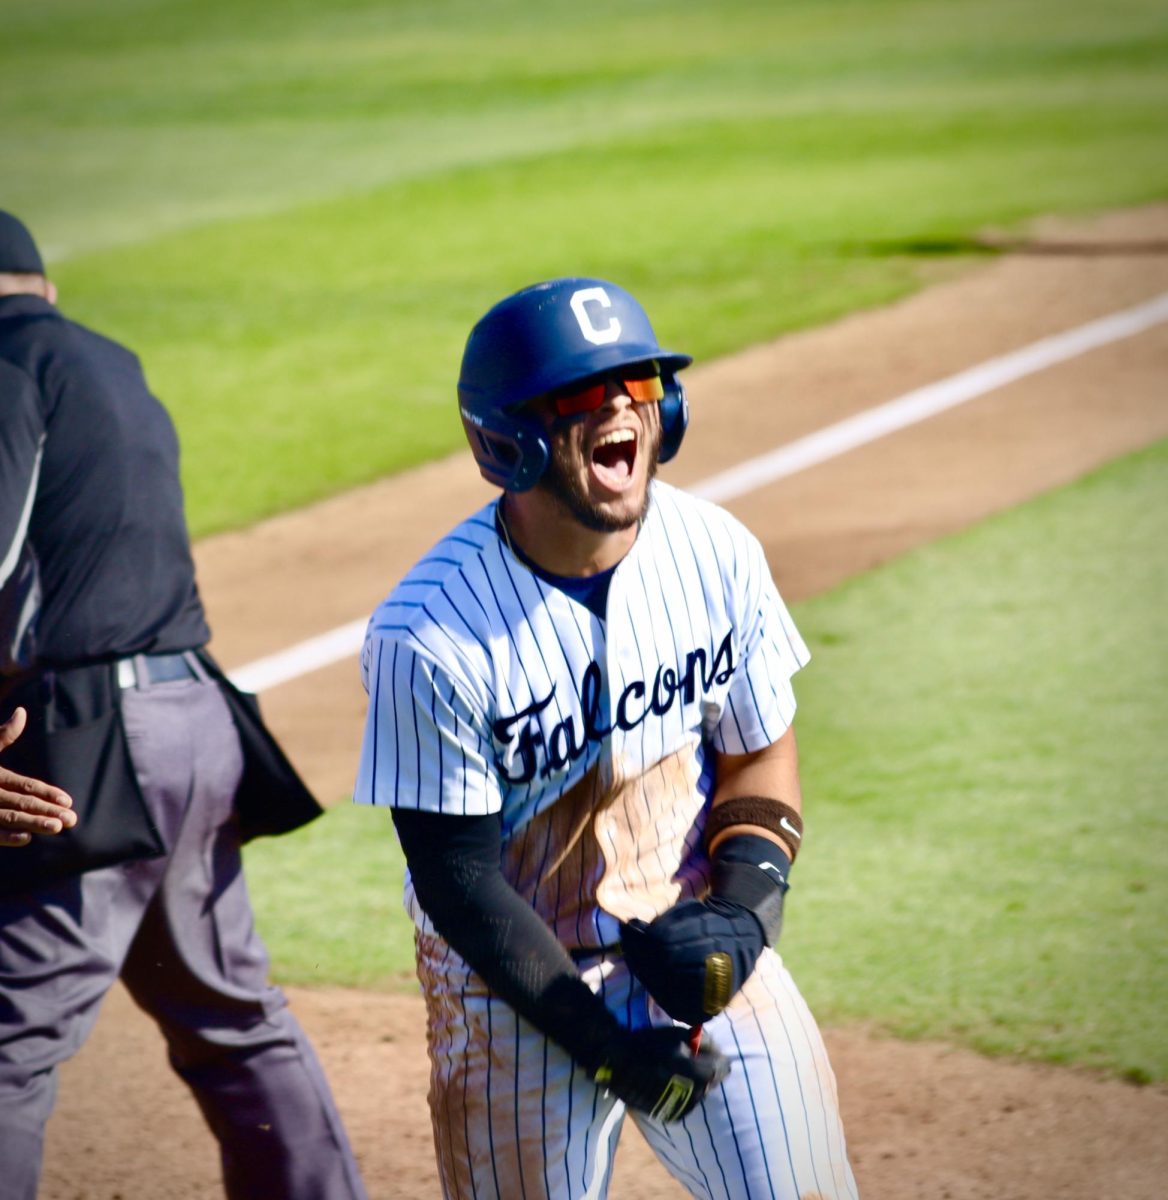 Anthony Bassett, infielder yelling while putting his arms together after scoring. Photo credit: Joel Carpio